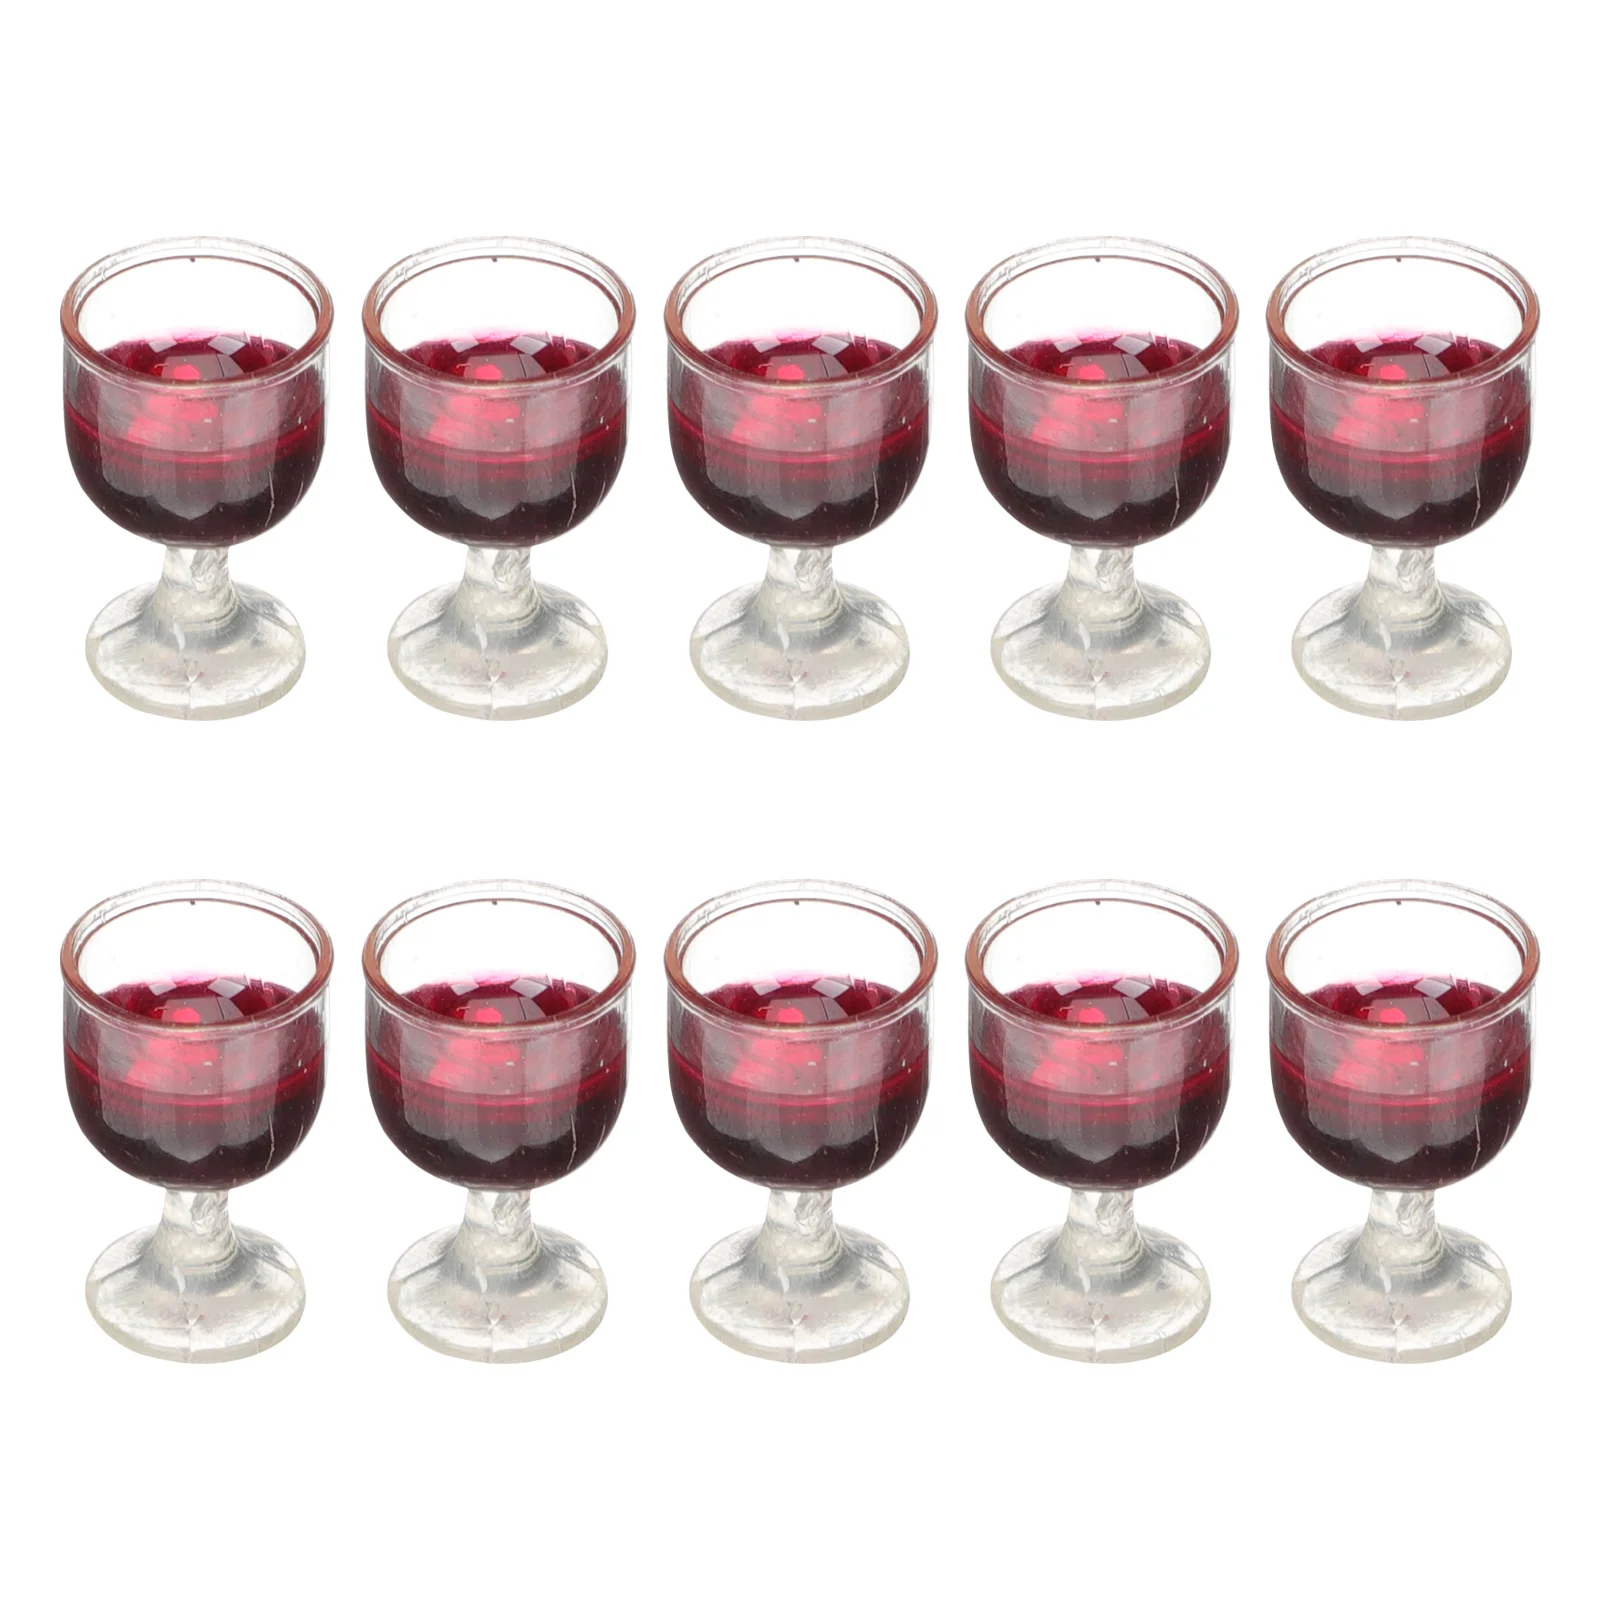 

10 Pcs Dollhouse Glass Cocktail Decorations for Drinks Decorative Miniatures Baby Micro Landscape Glasses Dolly Pvc